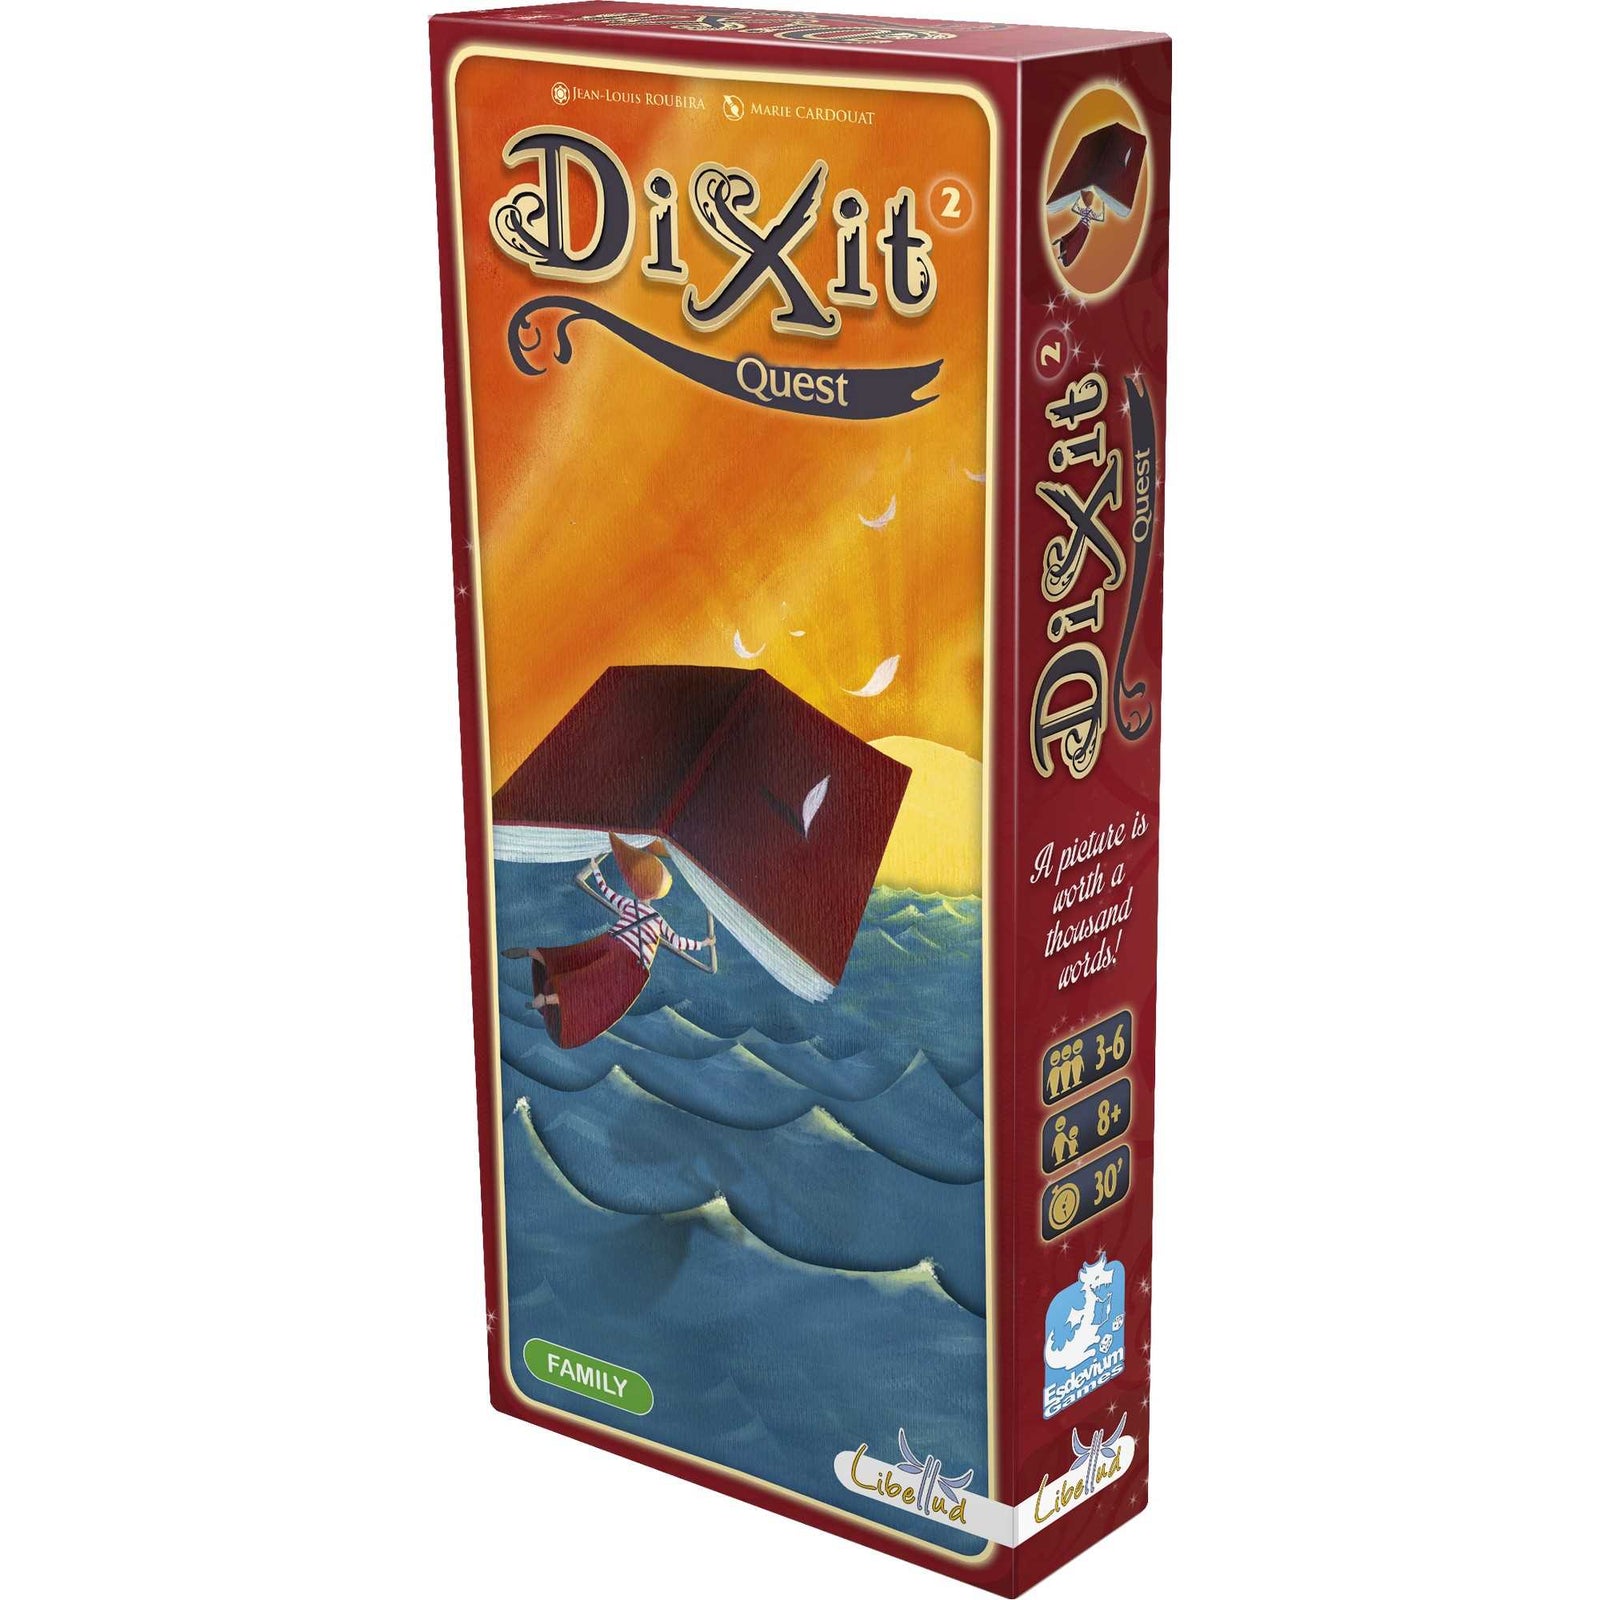 Box packaging for Dixit Quest